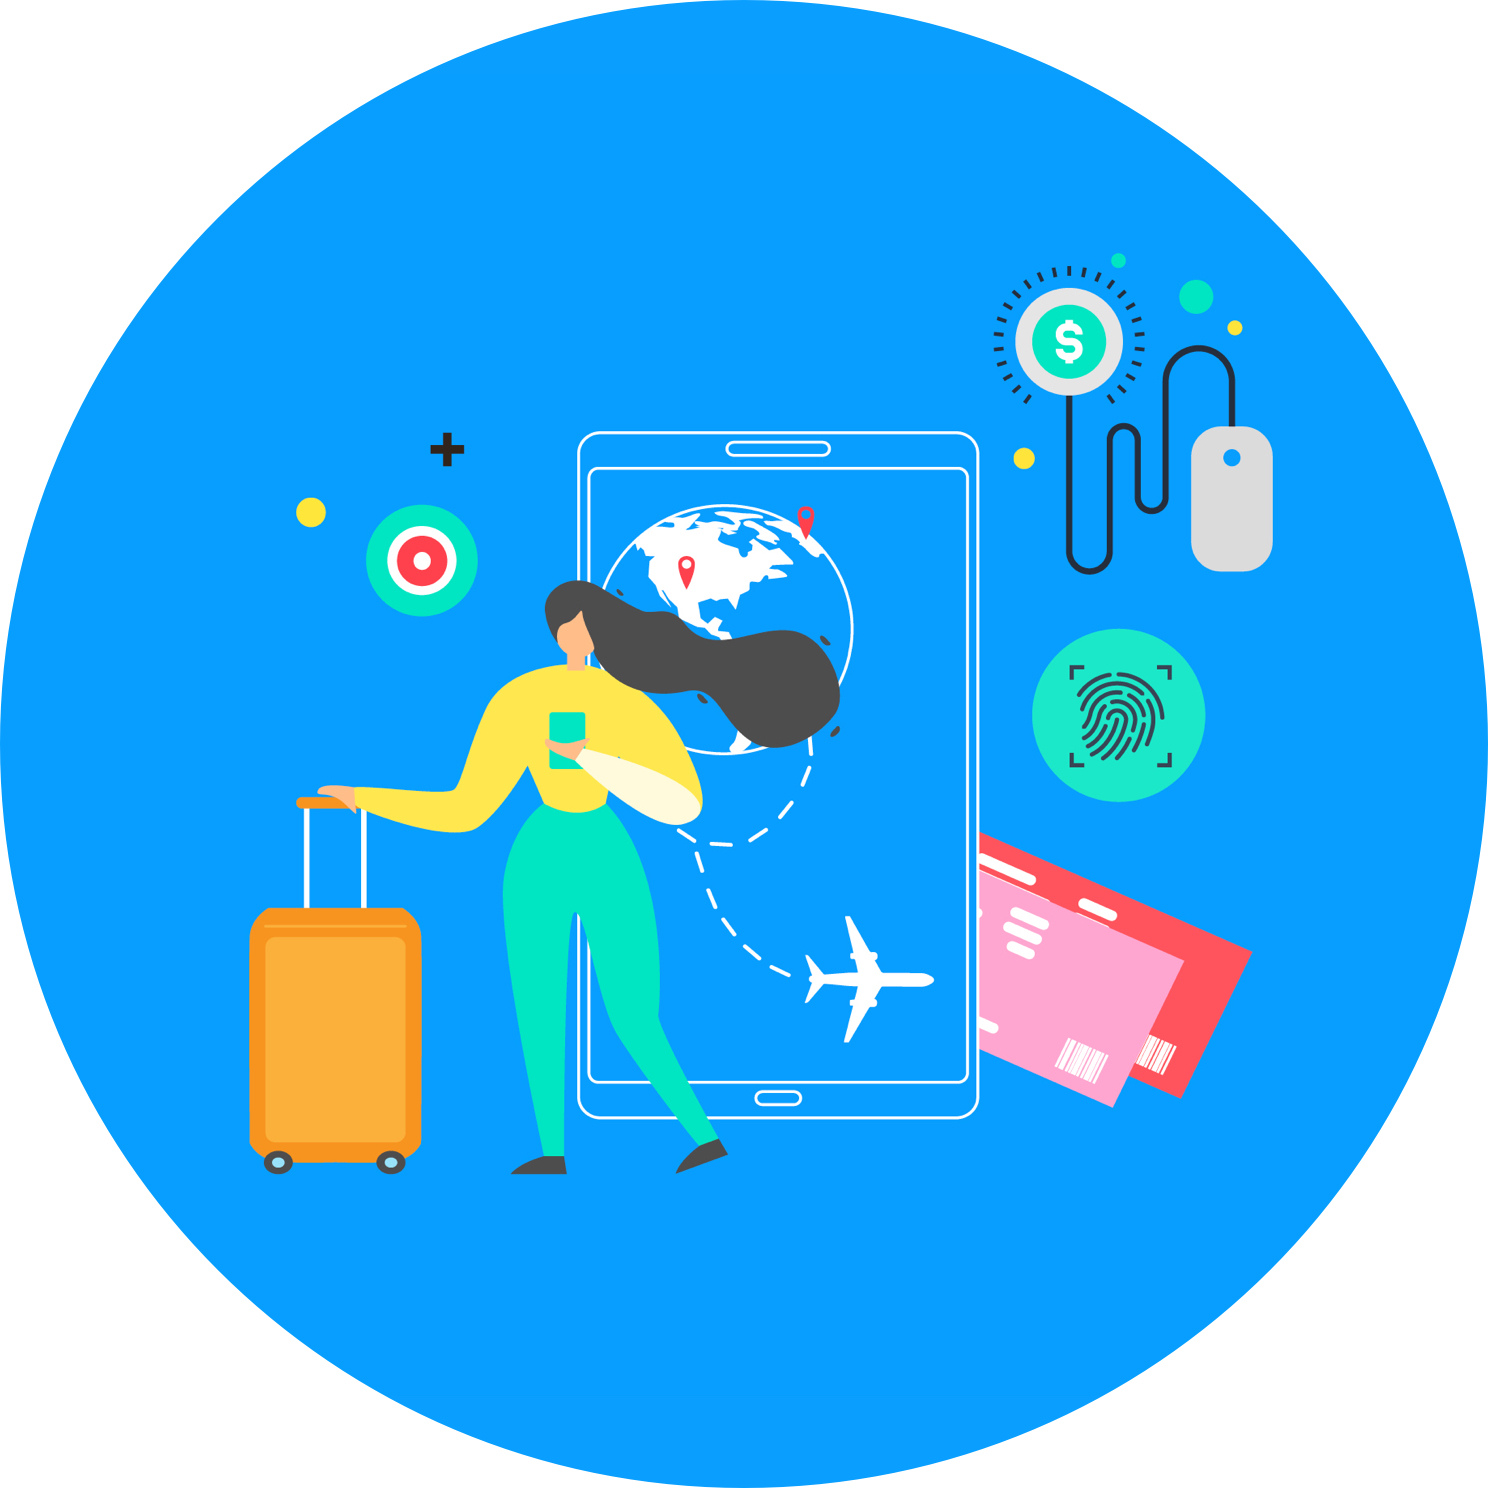 Illustration of traveler customer's interactions that promote a seamless experience